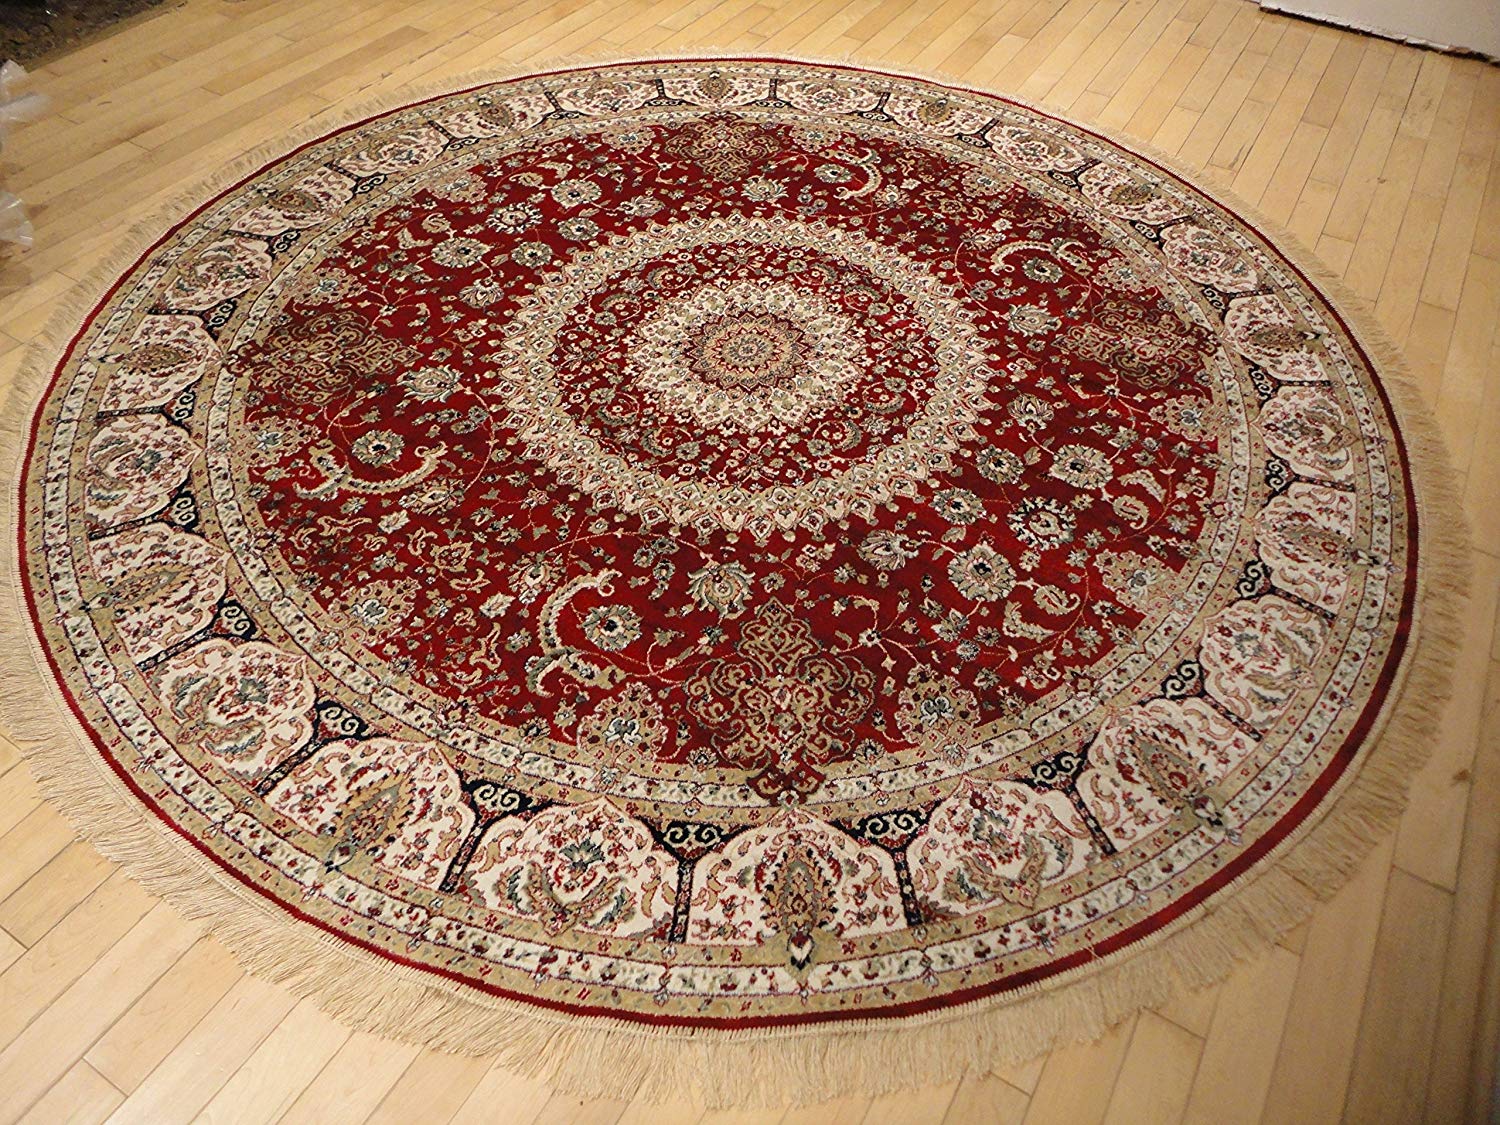 brown area rug with circles amazon.com: stunning silk persian area rugs traditional design red tabriz  8x8 round YUFFYPQ